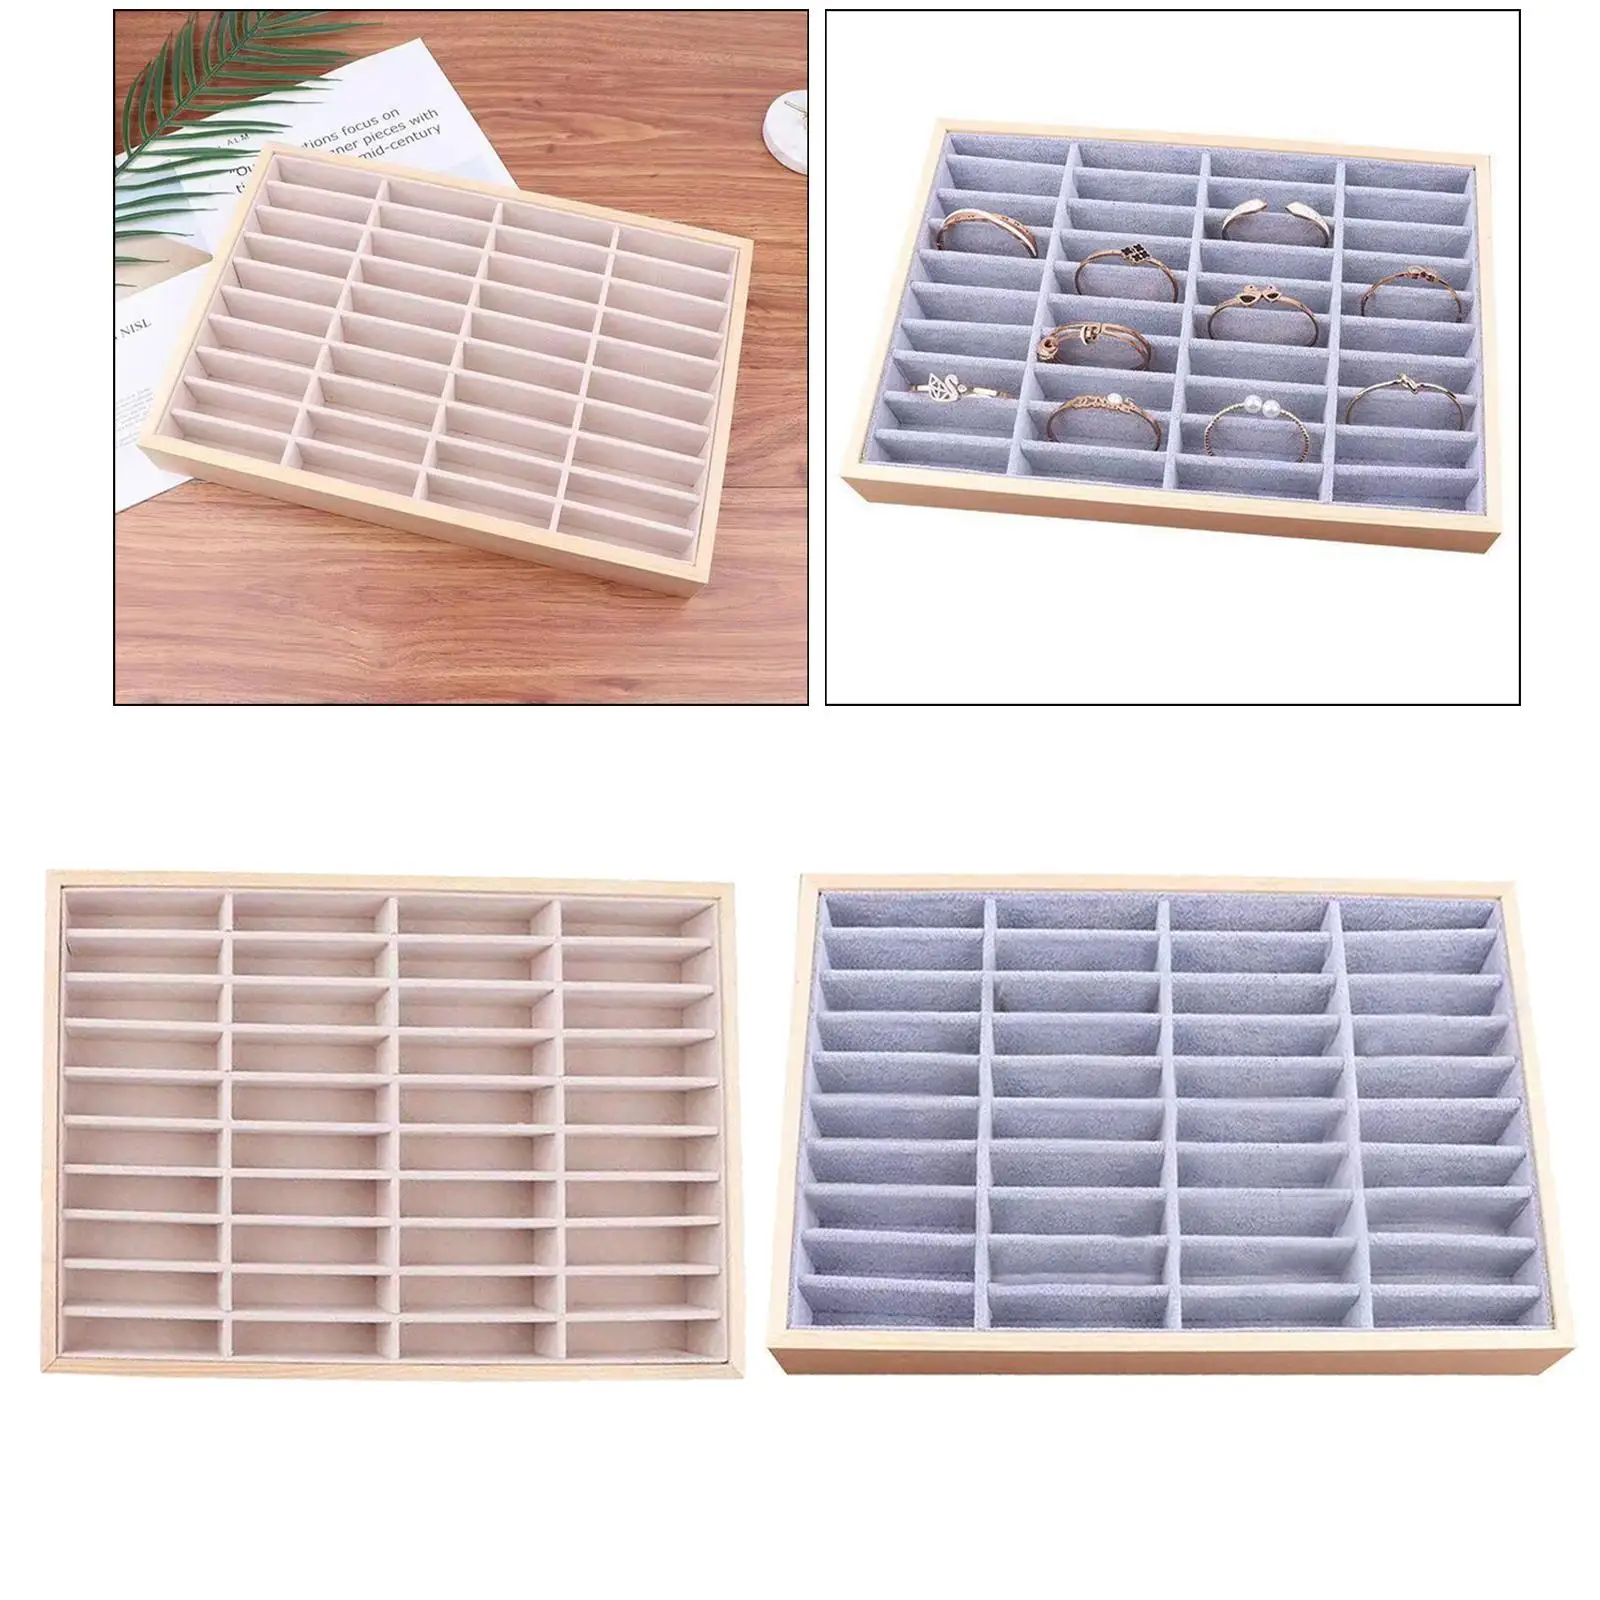 Wood Velvet Jewelry Organizer Display Case Tray Box for Necklaces 40 Grids